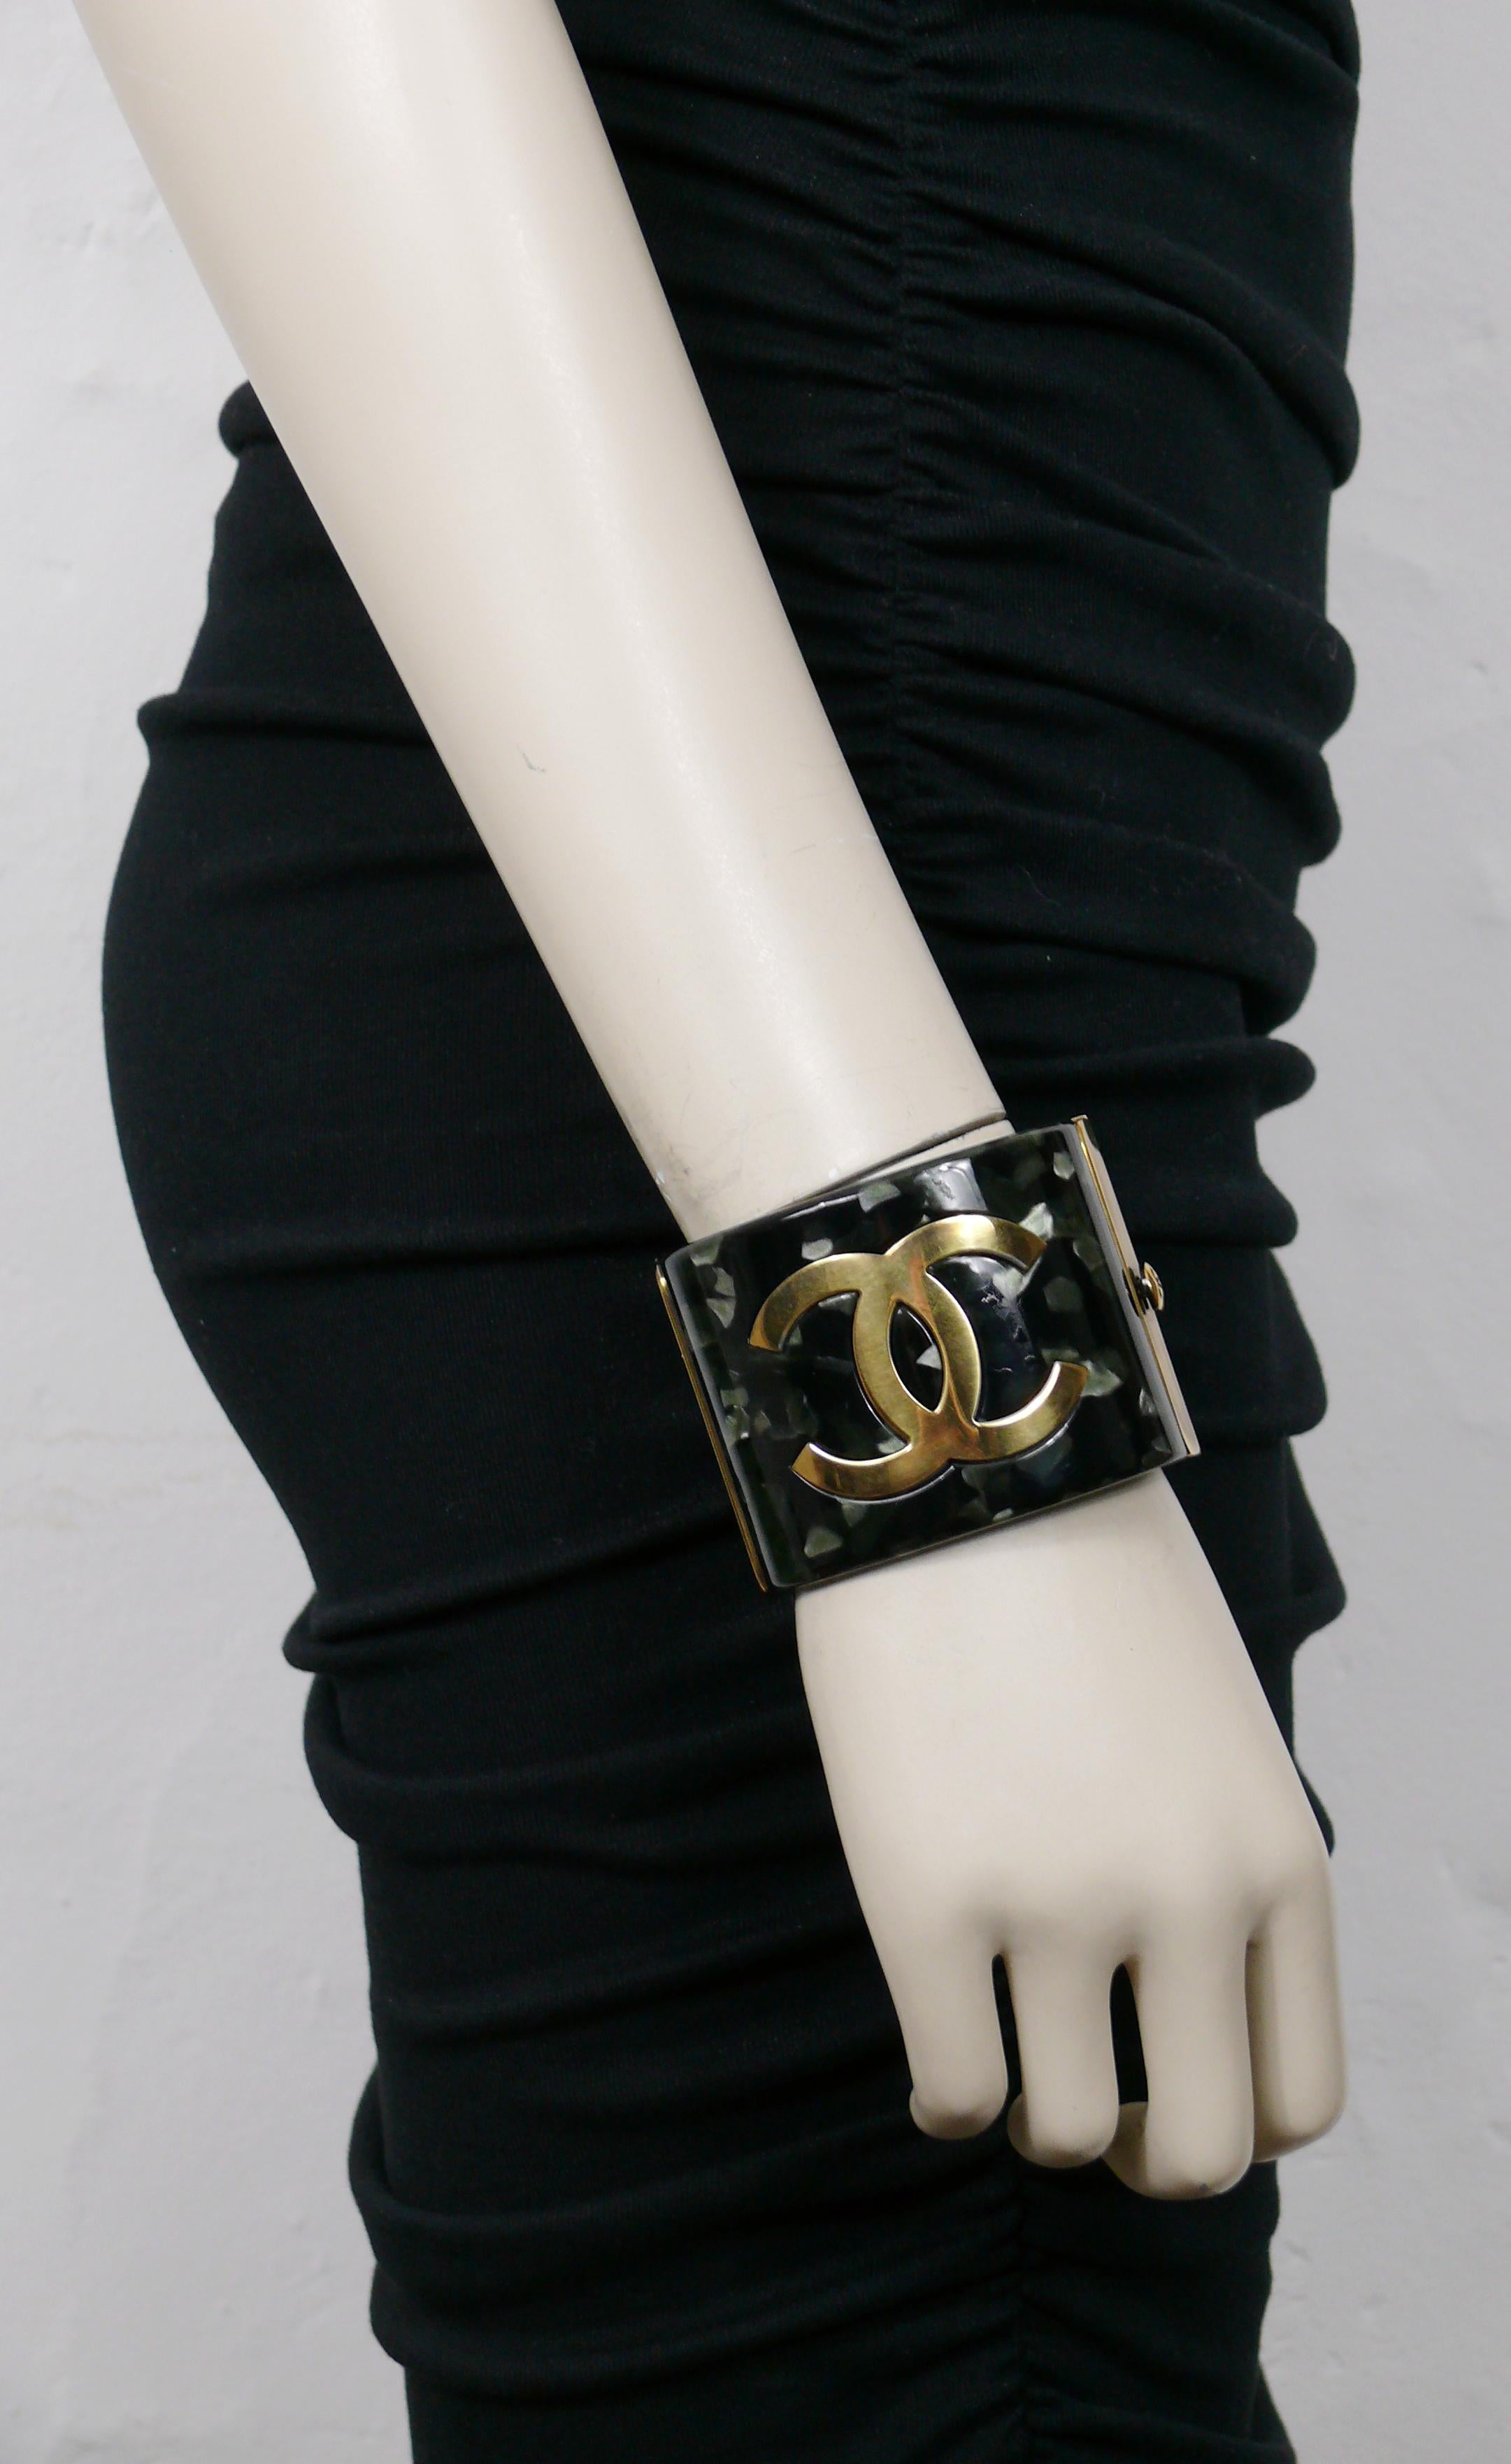 CHANEL by KARL LAGERFELD marbled dark green resin cuff bracelet featuring a large CC logo on one side and chinese ideograms on the other side.

Oxidized gold tone metal hardware.

From the Pre-Fall 2010 Metiers D'Art Paris-Shanghai Collection.

Push